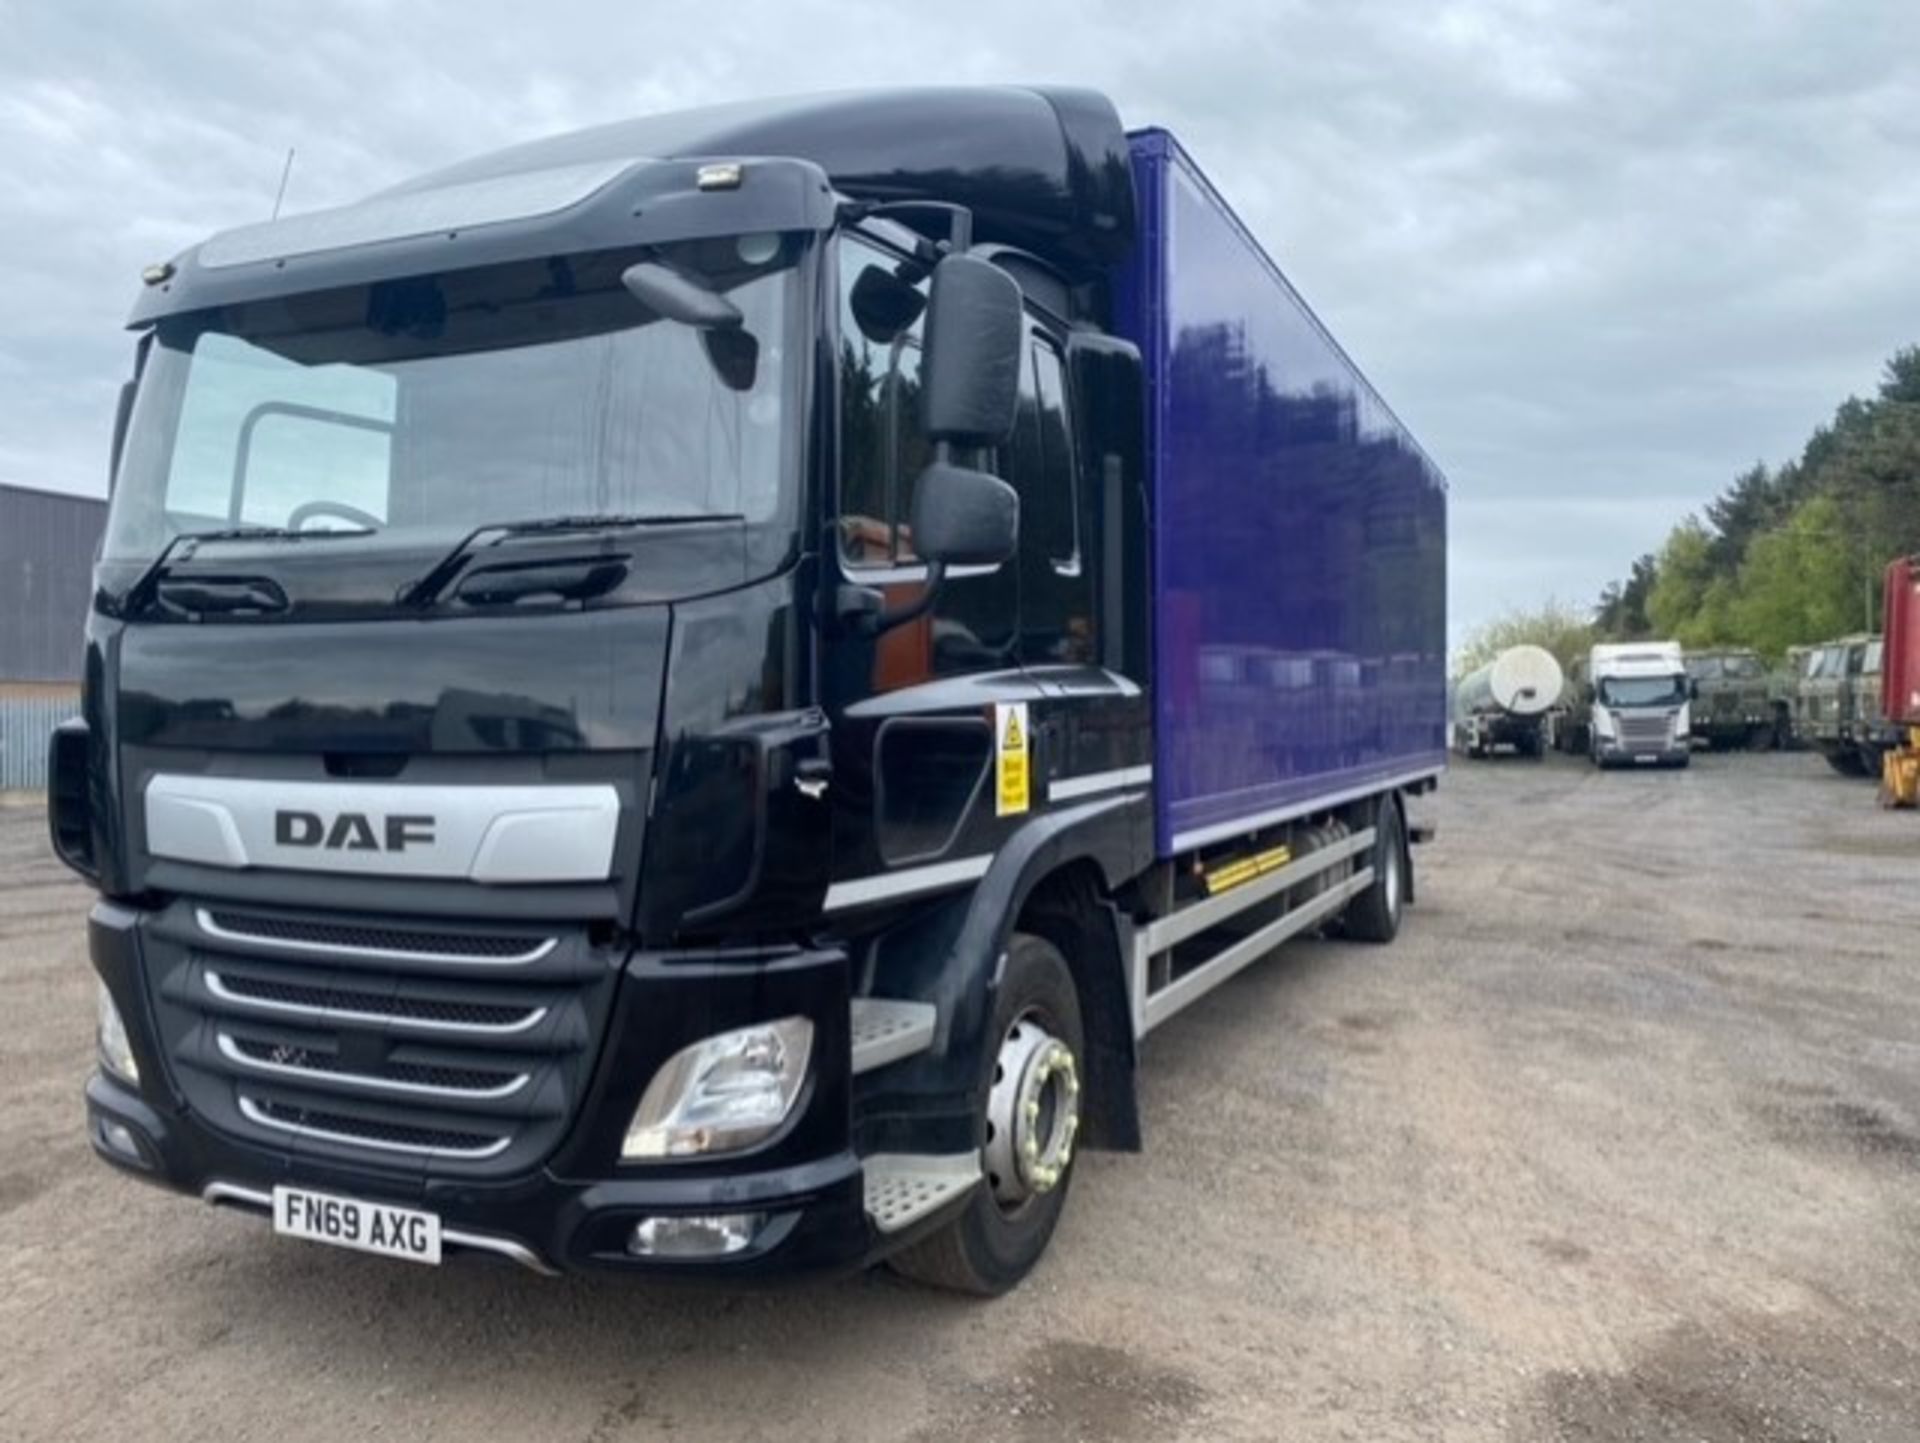 2019, DAF CF 260 - FN69 AXG (18 Ton Rigid Truck with Tail Lift) - Image 2 of 16